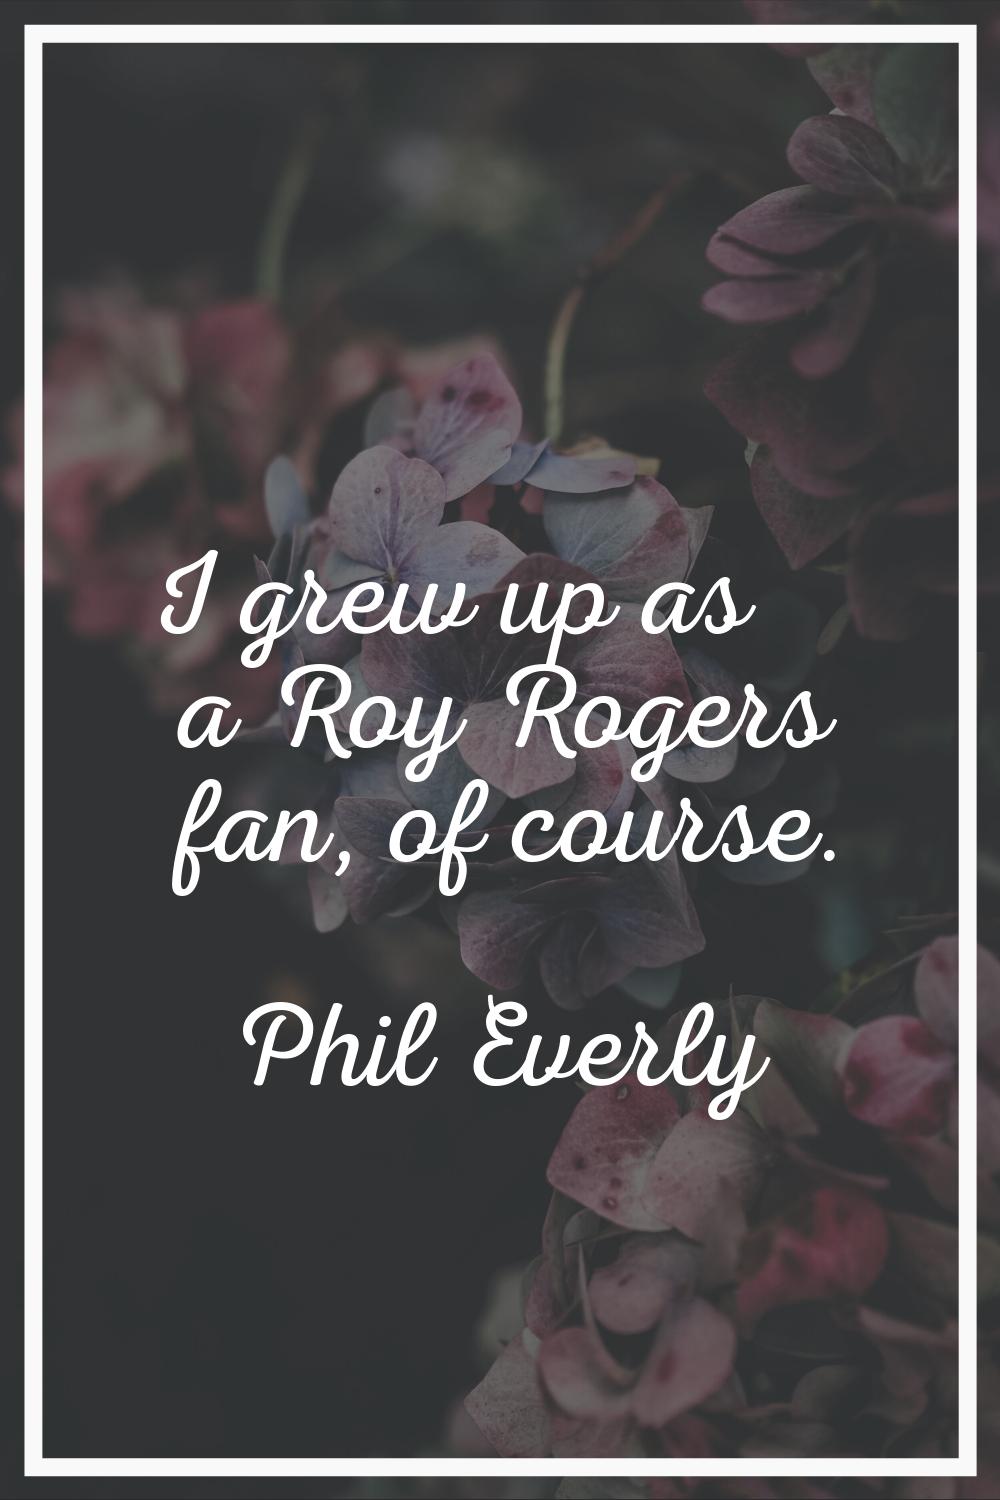 I grew up as a Roy Rogers fan, of course.